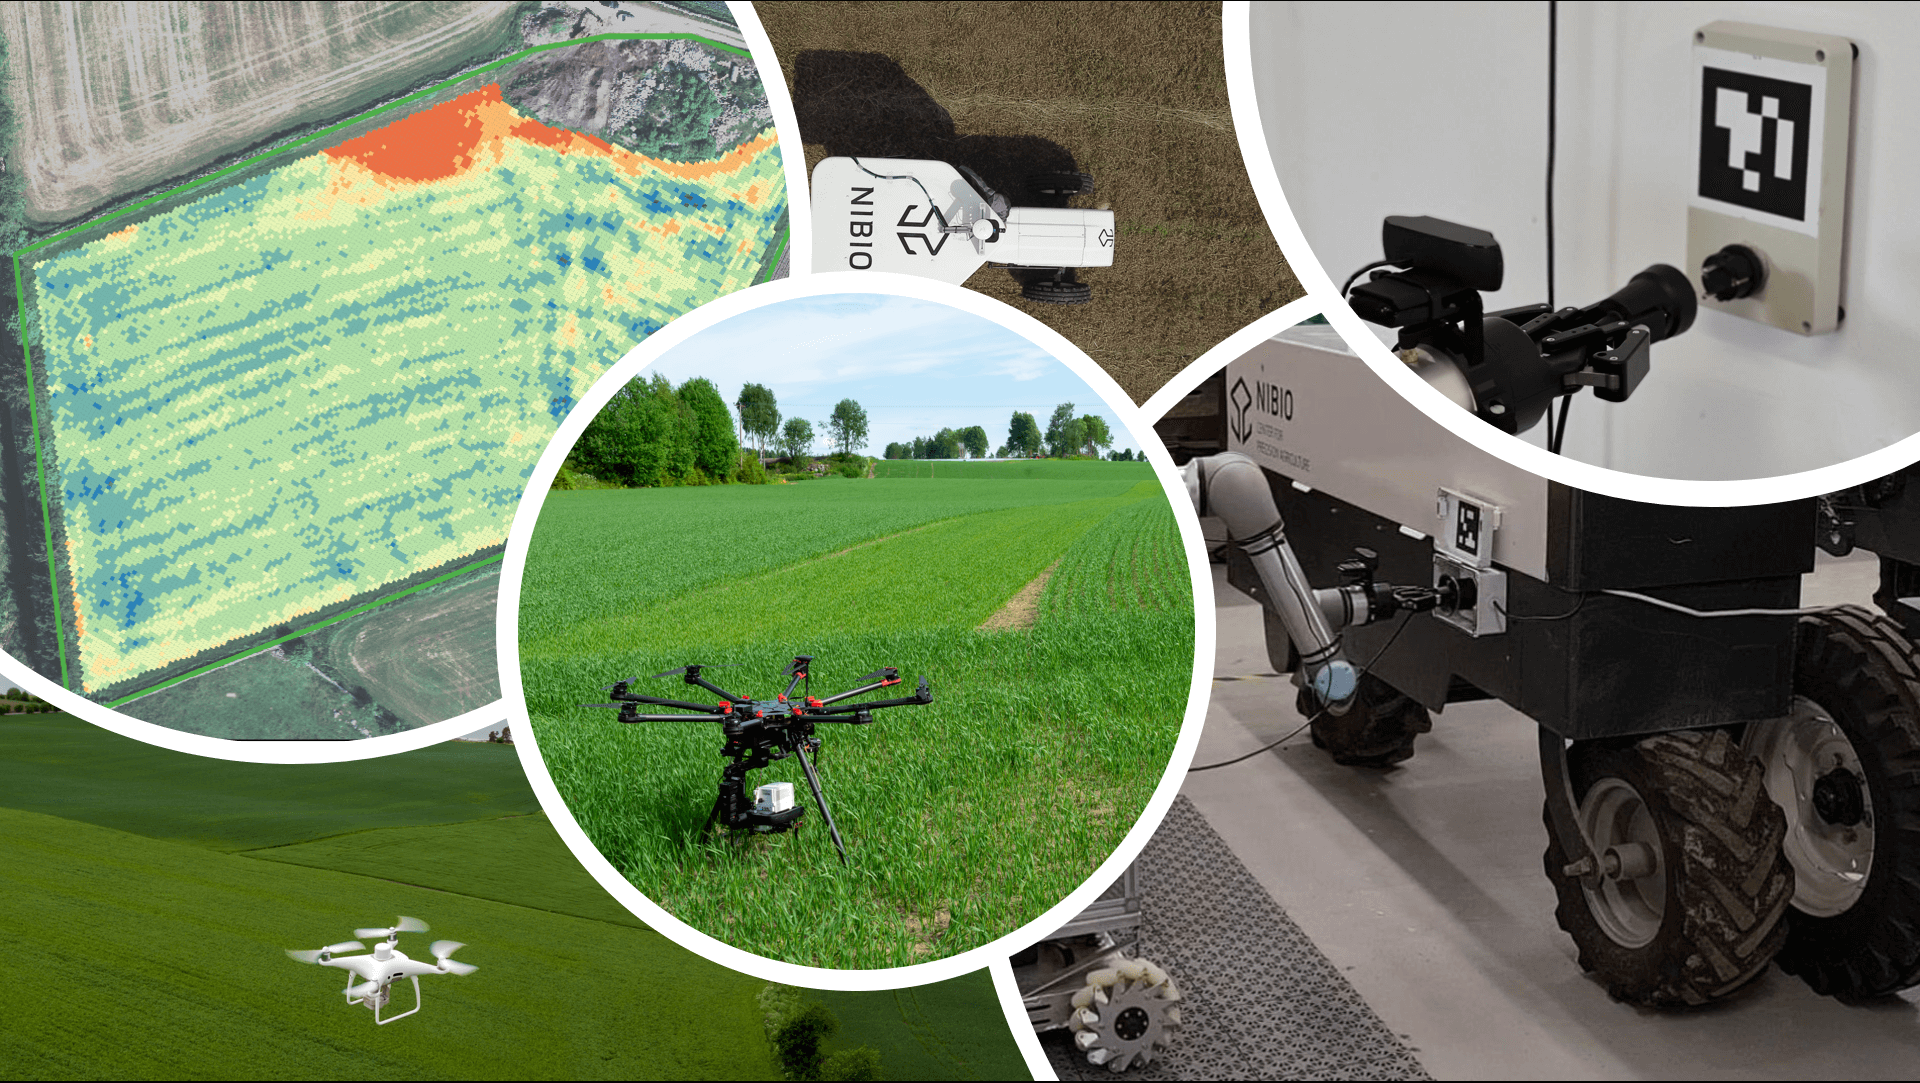 Technology day NIBIO Center for Precision Agriculture